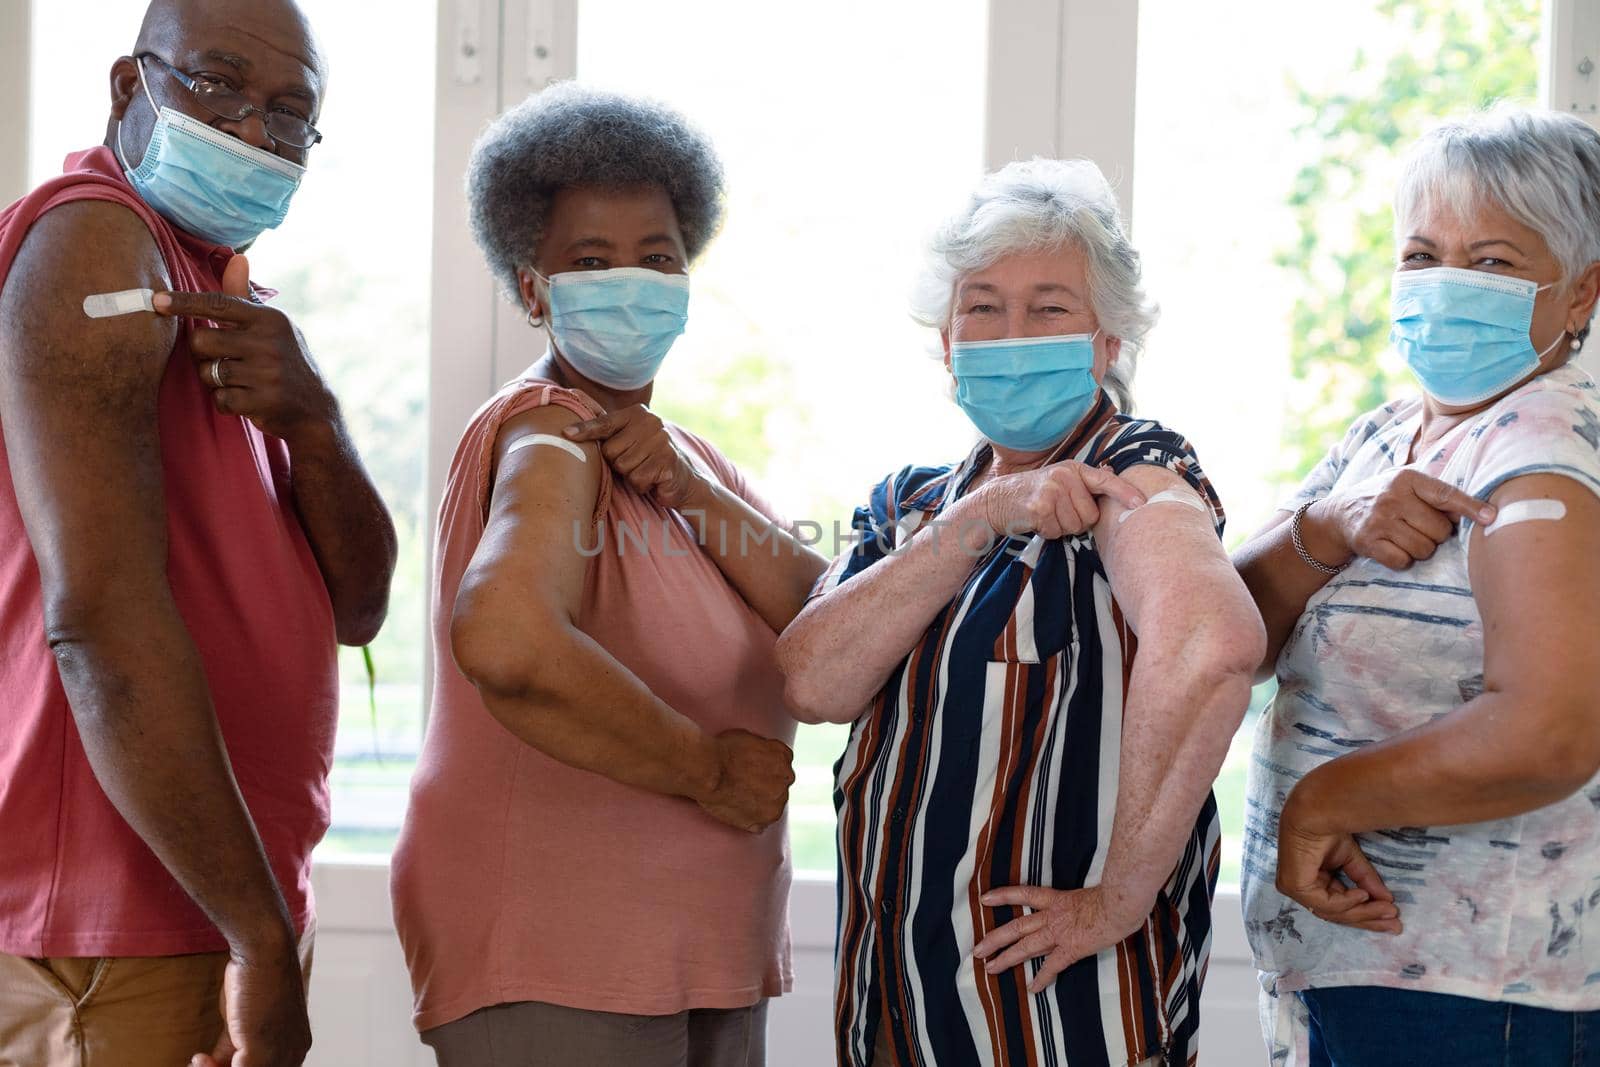 Four diverse male and female senior friends wearing face masks showing plasters after vaccination. senior health and lifestyle during covid 19 pandemic.